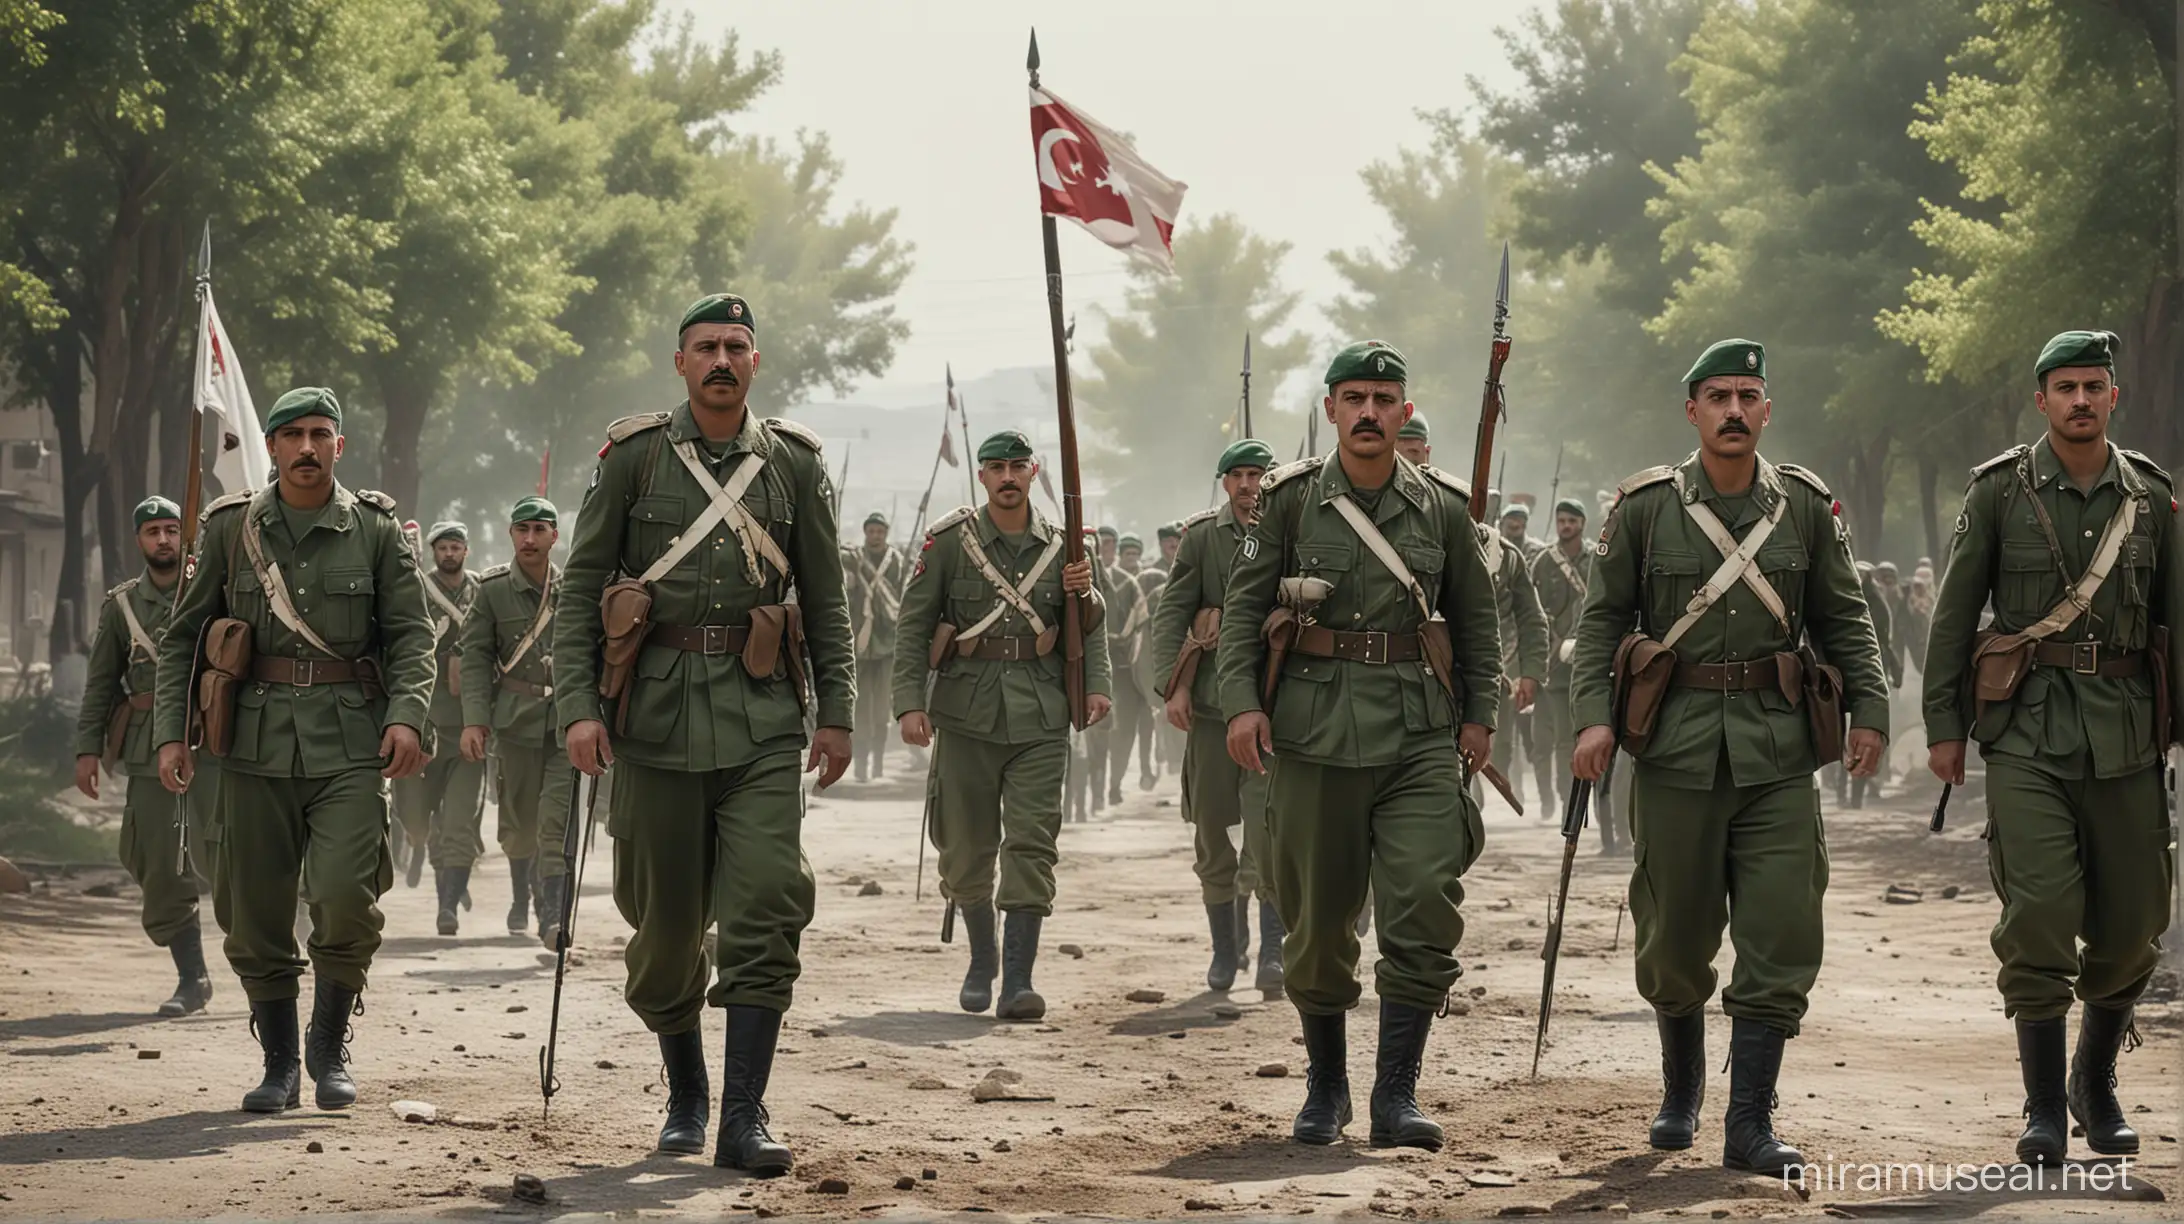 Turkish soldiers, green dressed as soldiers, unarmed Turkish soldiers surrend. One of them carry a white flag, 21st century, hyperrealist, cinematographic